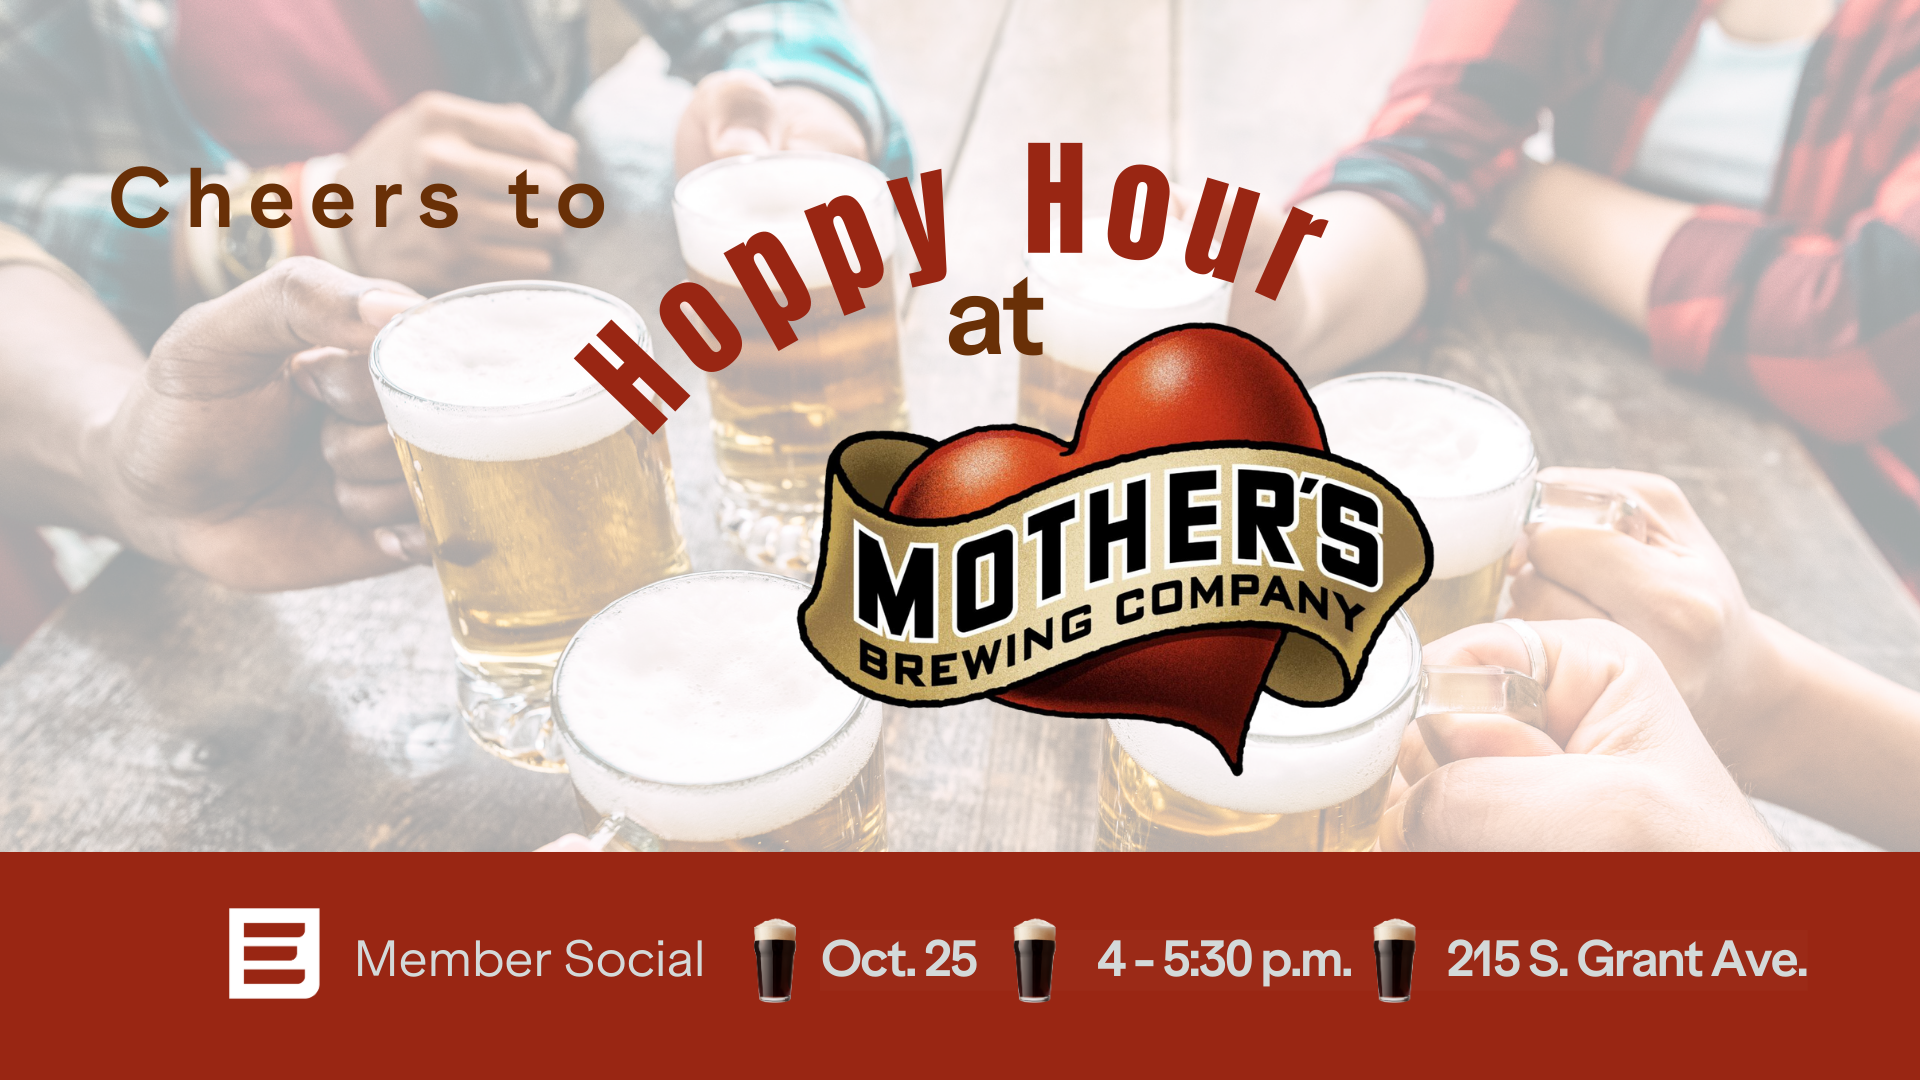 Hoppy Hour at Mother's Brewing Oct. 25 from 4-5:30 p.m. at 215 S. Grant Ave.